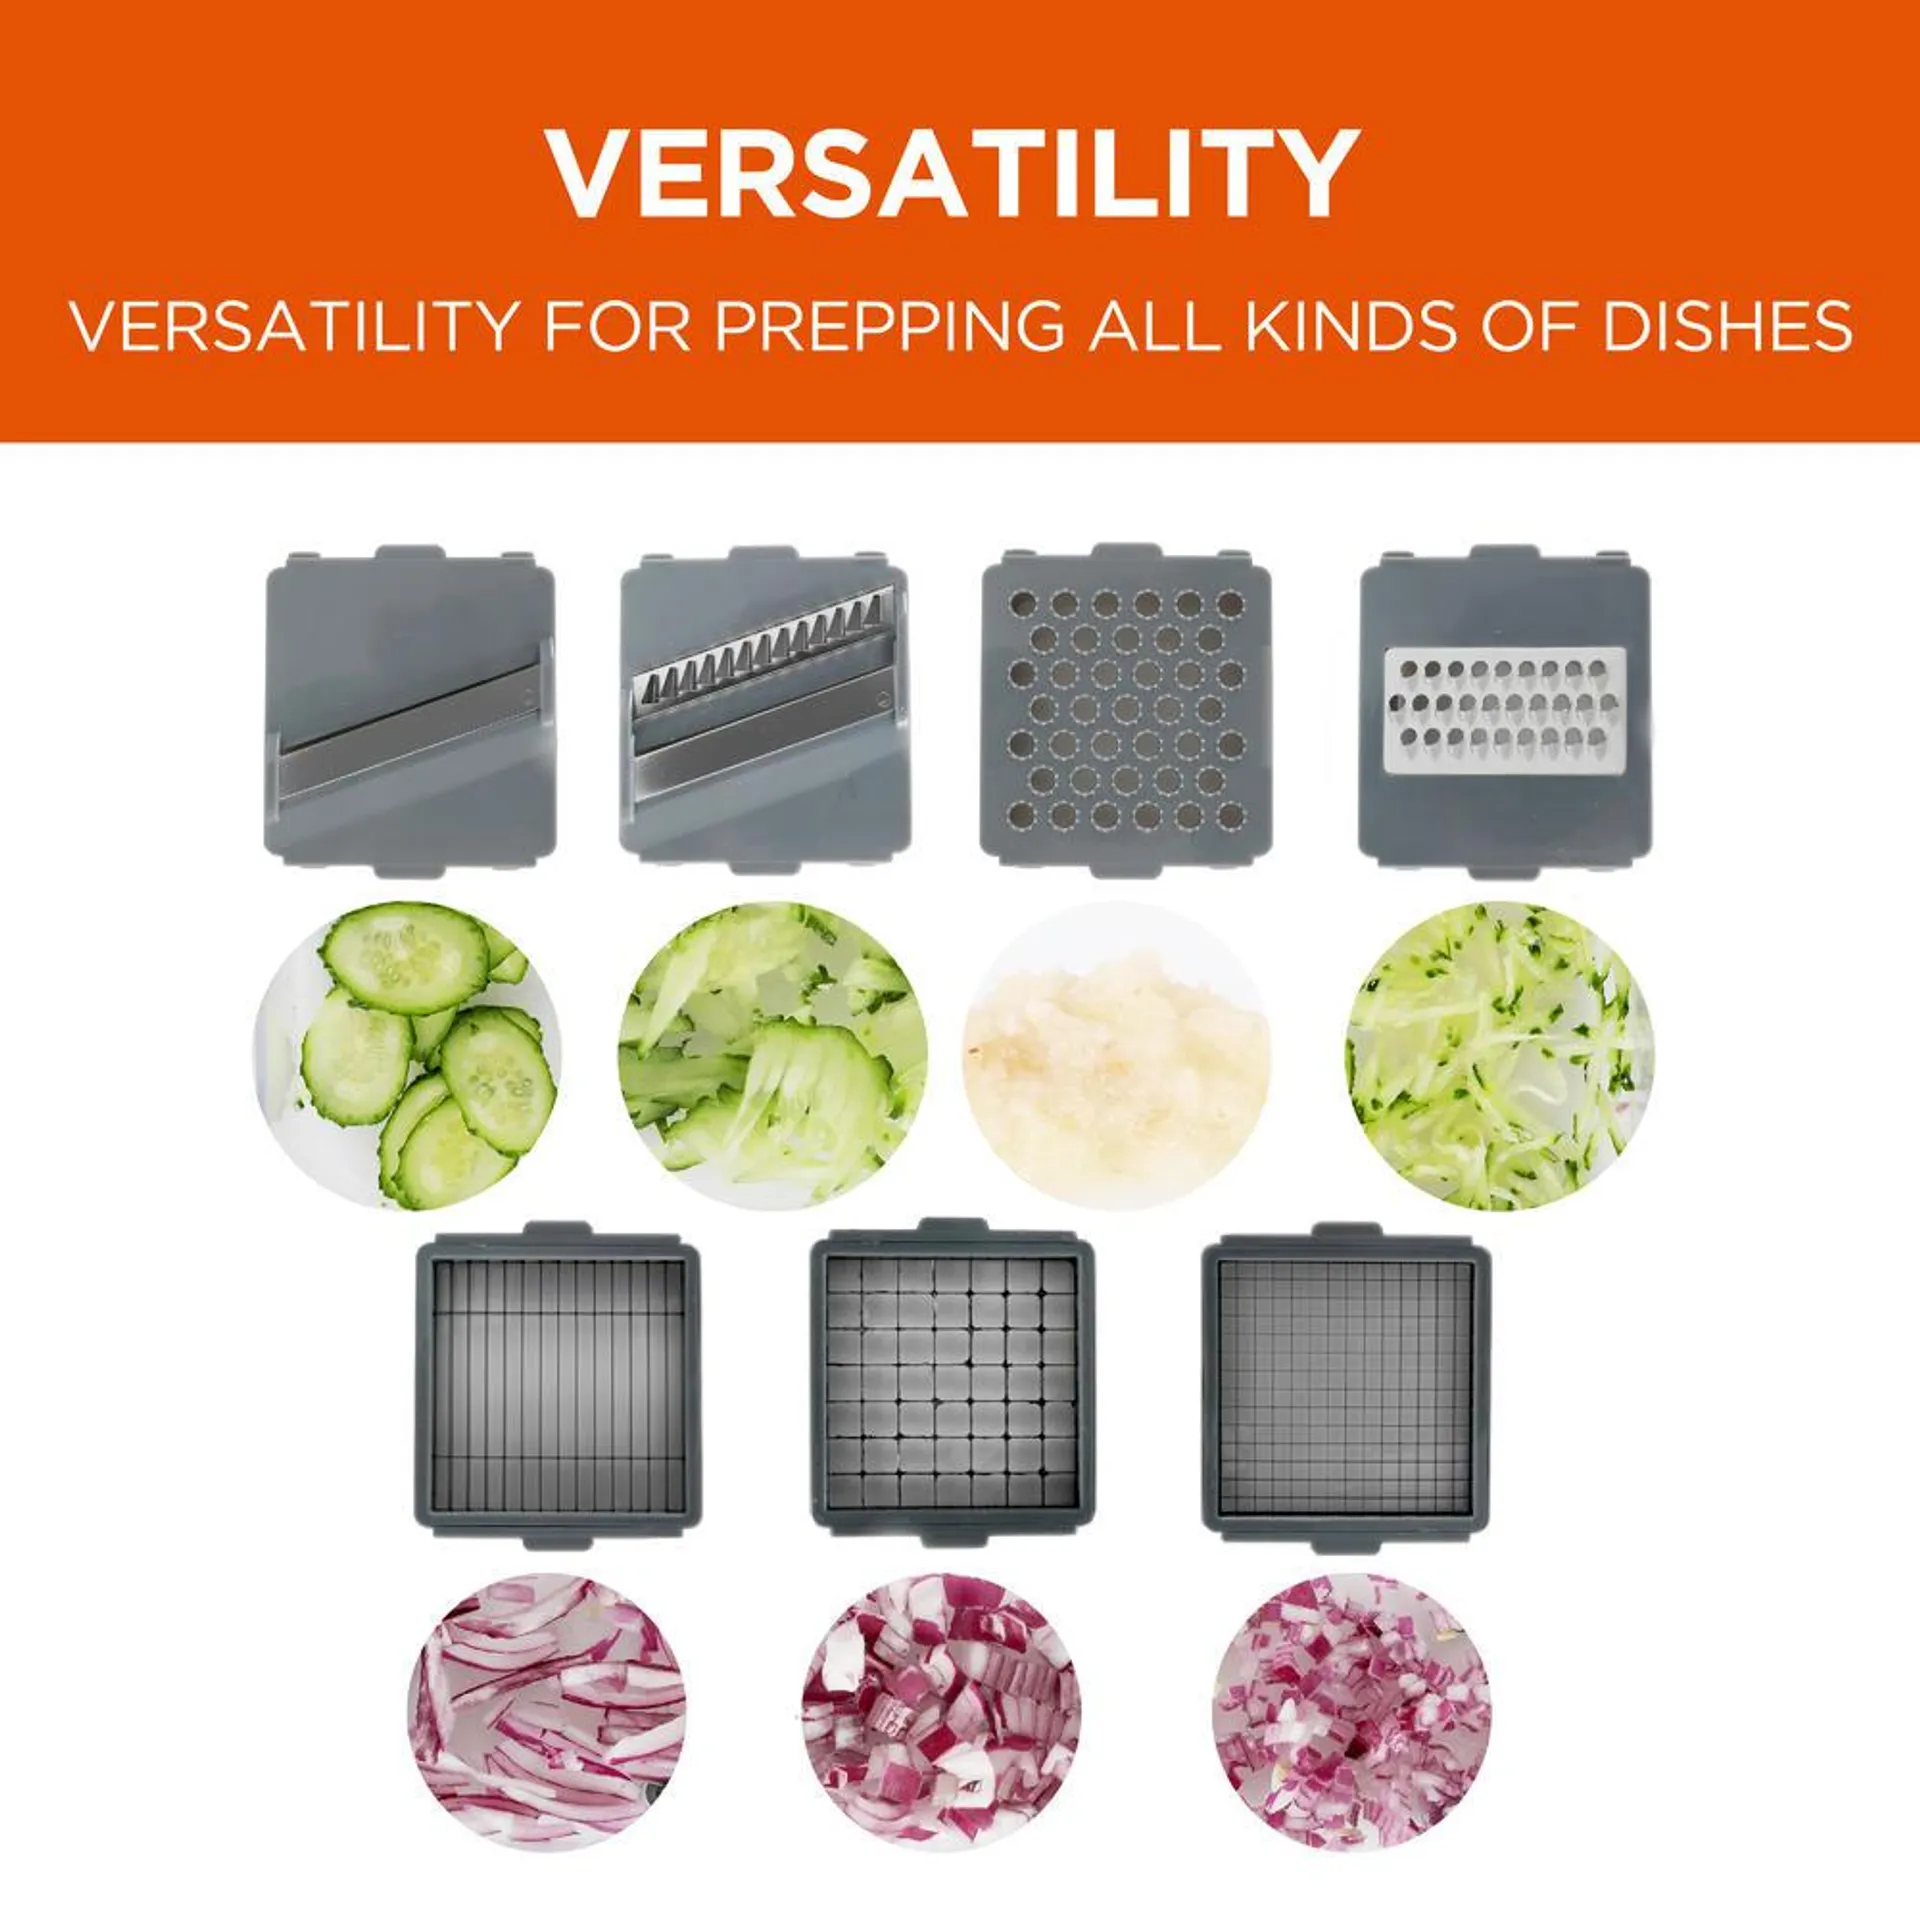 COMMERCIAL CHEF Multifunctional Vegetable Cutter & Slicer, Cheese Grater & Cheese Slicer, Chopper Vegetable Cutter